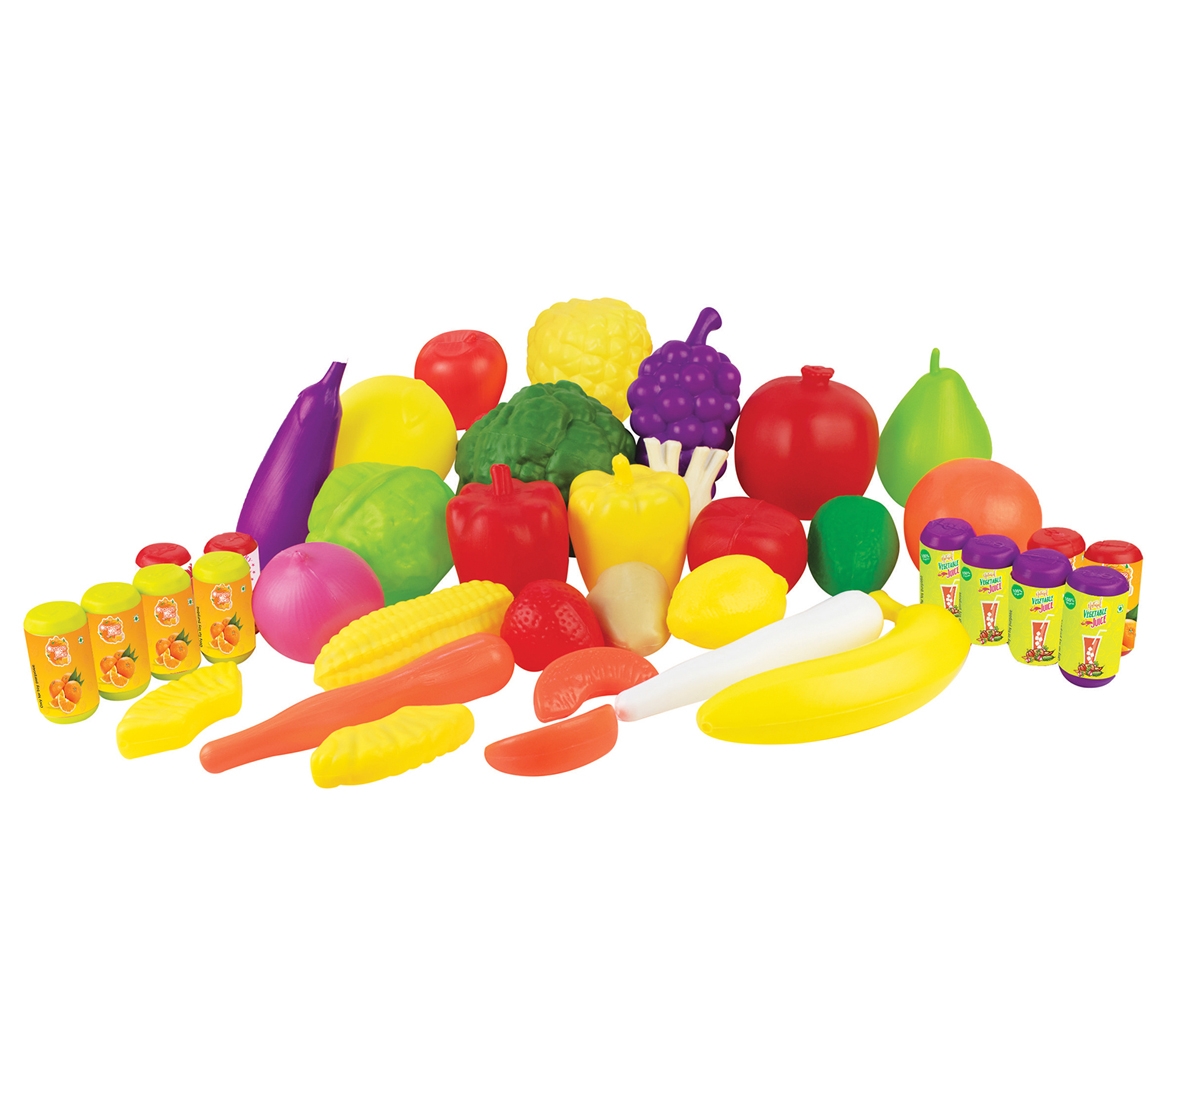 Kingdom Of Play | Kingdom Of Play Fruits and Vegetables set for kids Multicolor 24M+